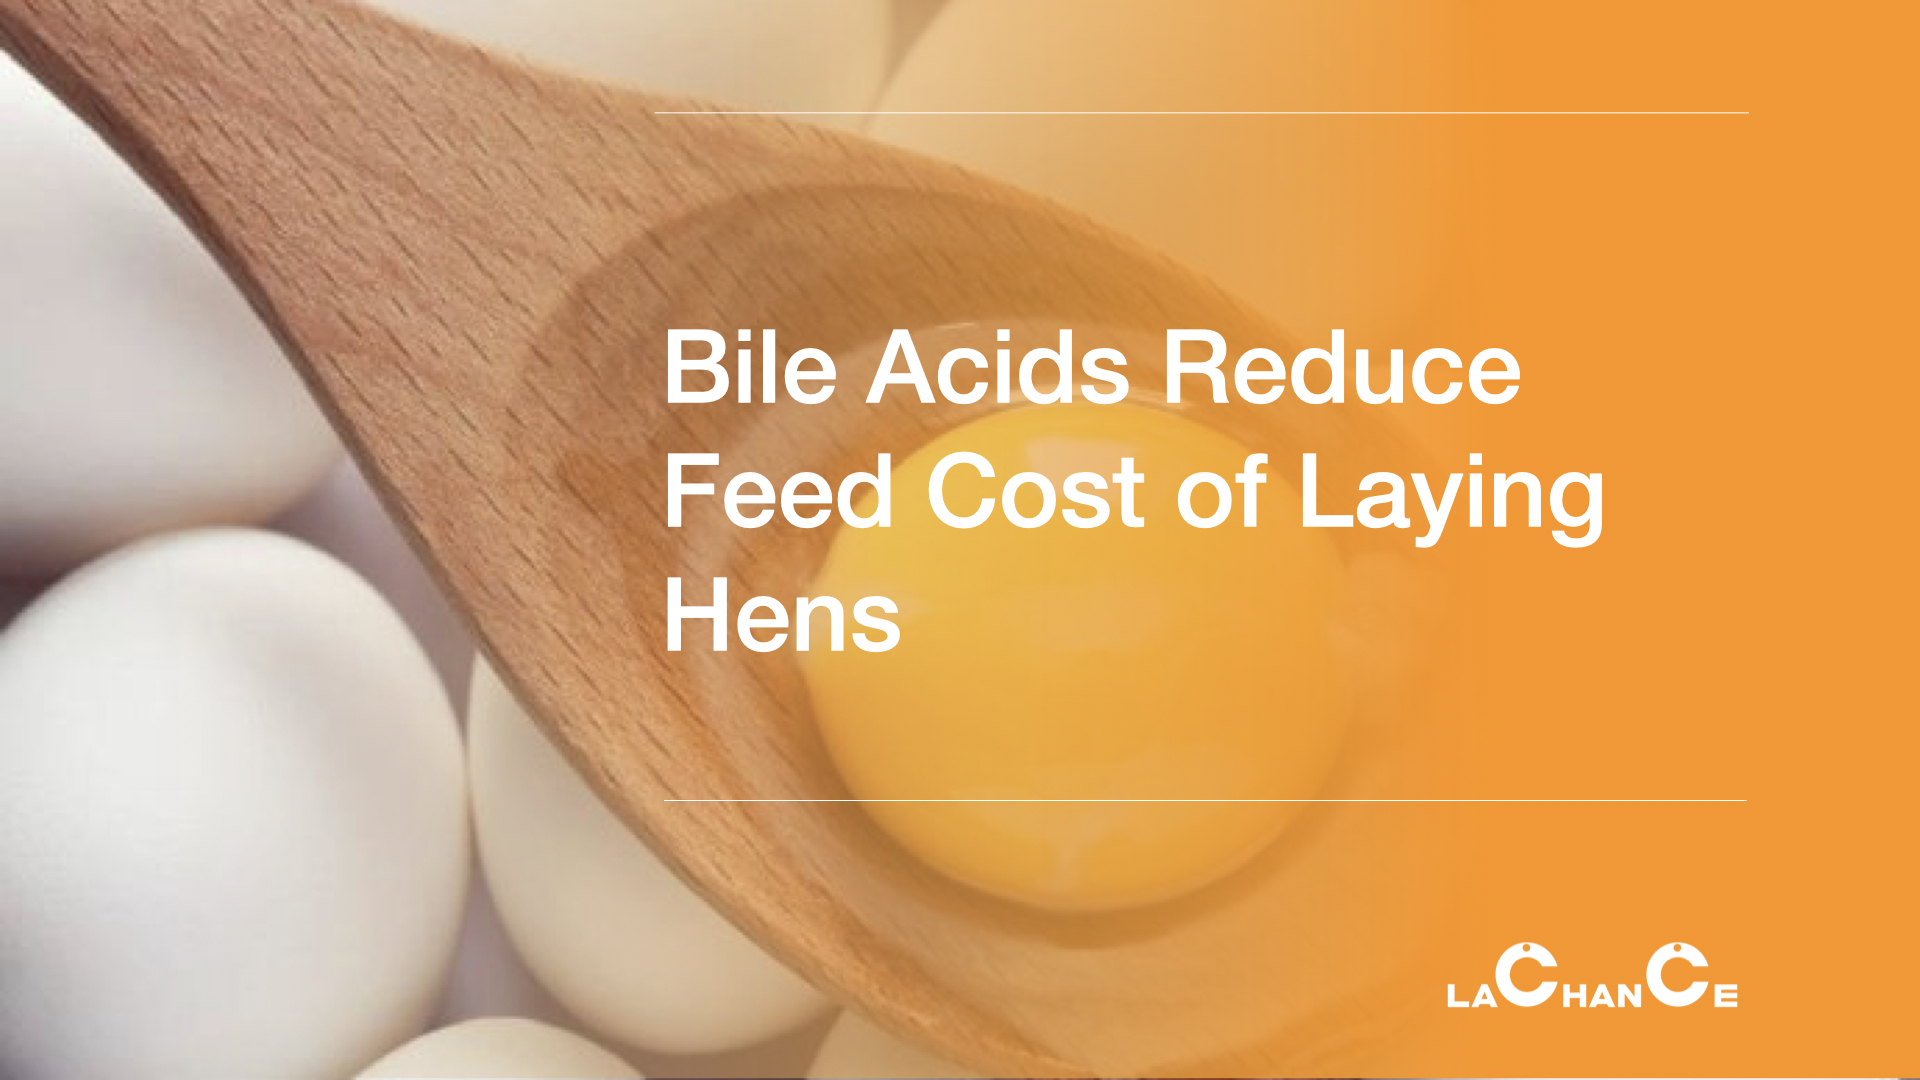 Lachance Nutrition | Bile Acids Reduce Feed Cost of Laying Hens